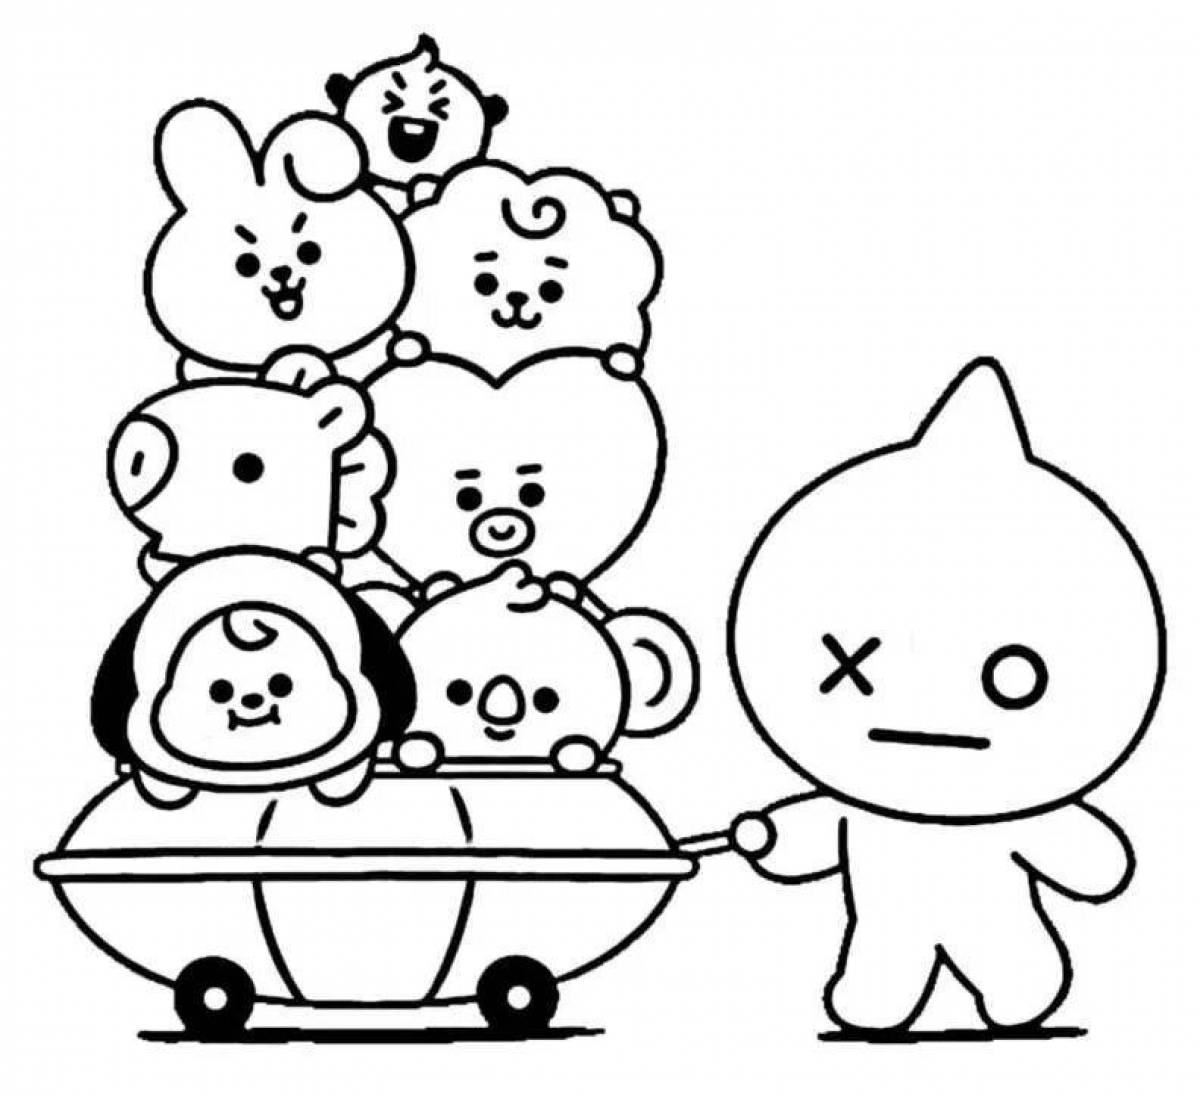 Exciting bt 21 coloring